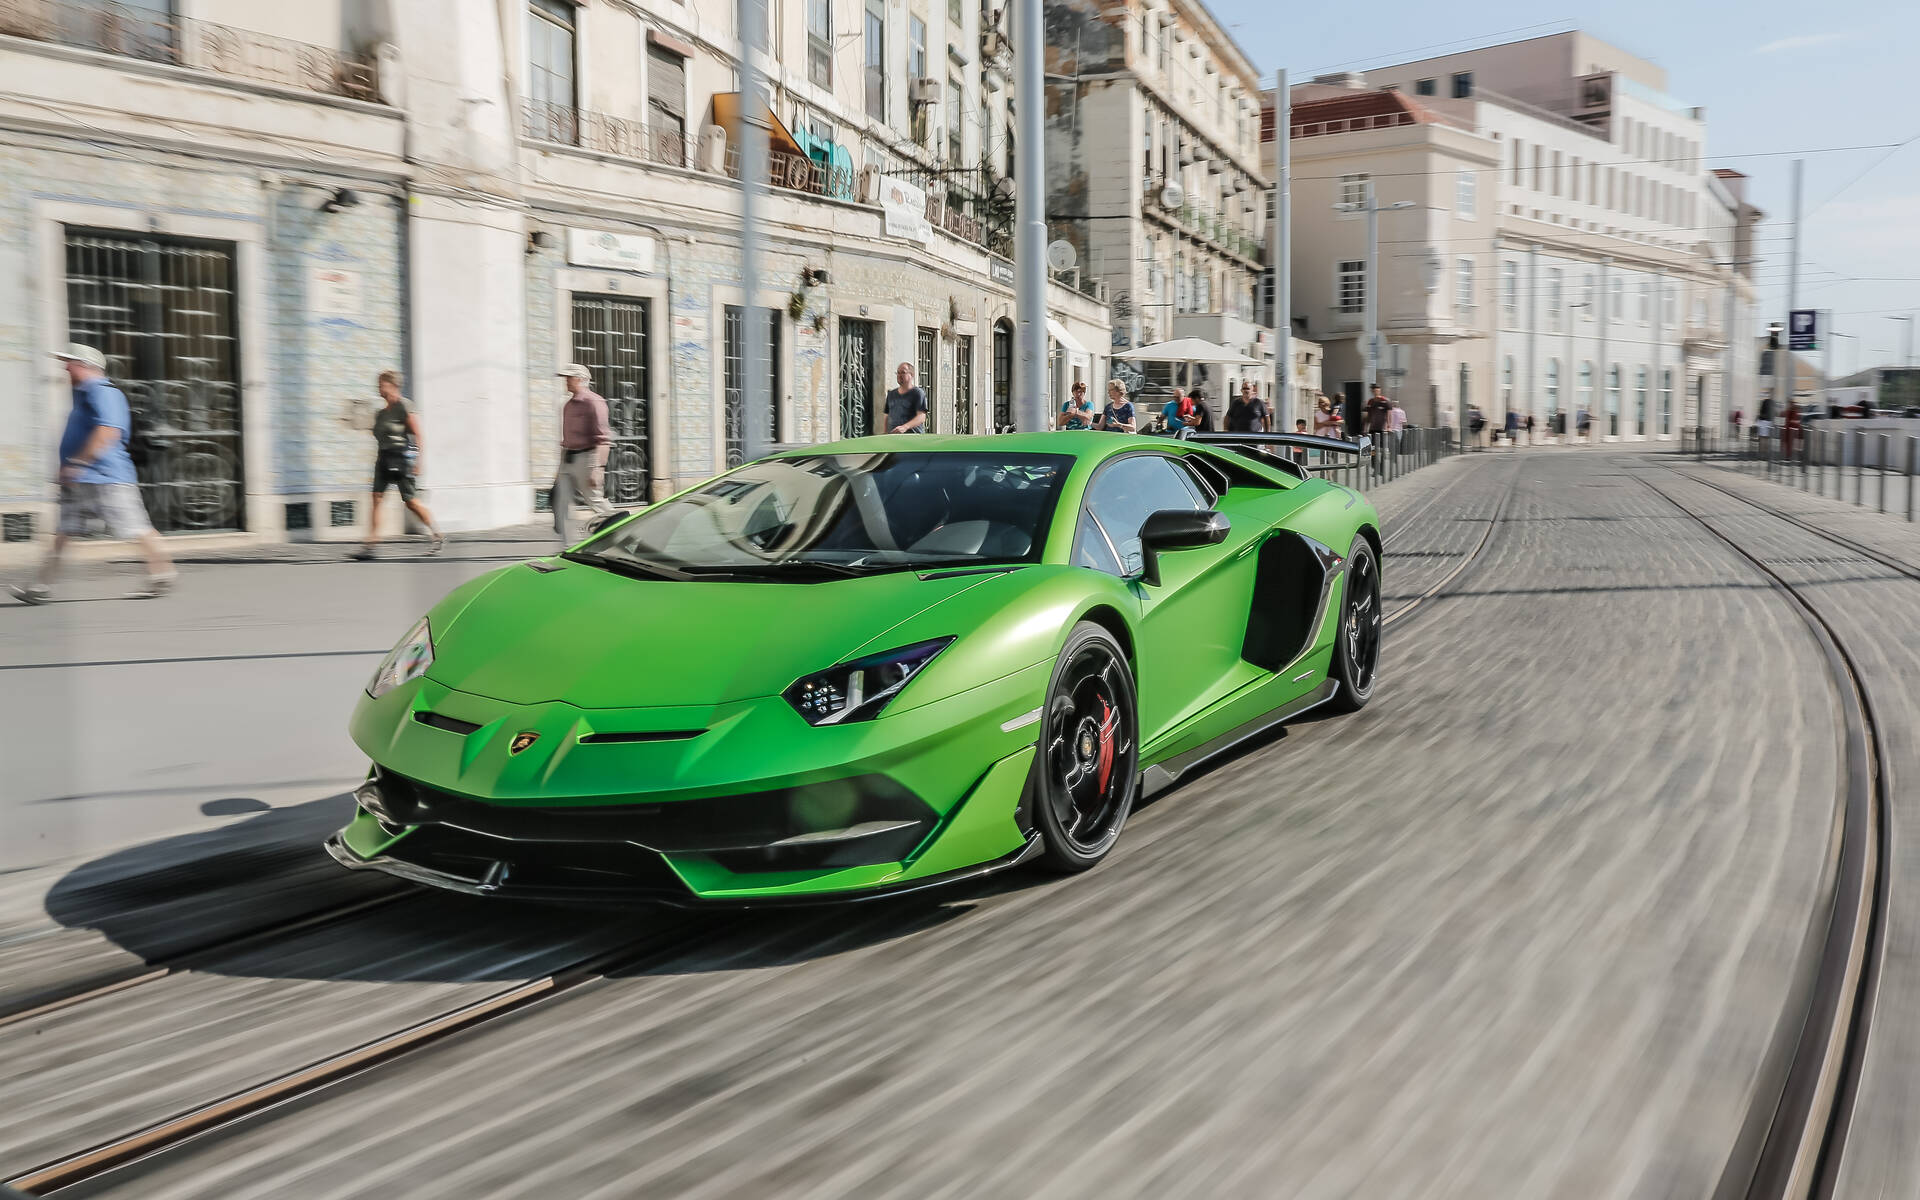 2021 Lamborghini Aventador - News, reviews, picture galleries and videos -  The Car Guide